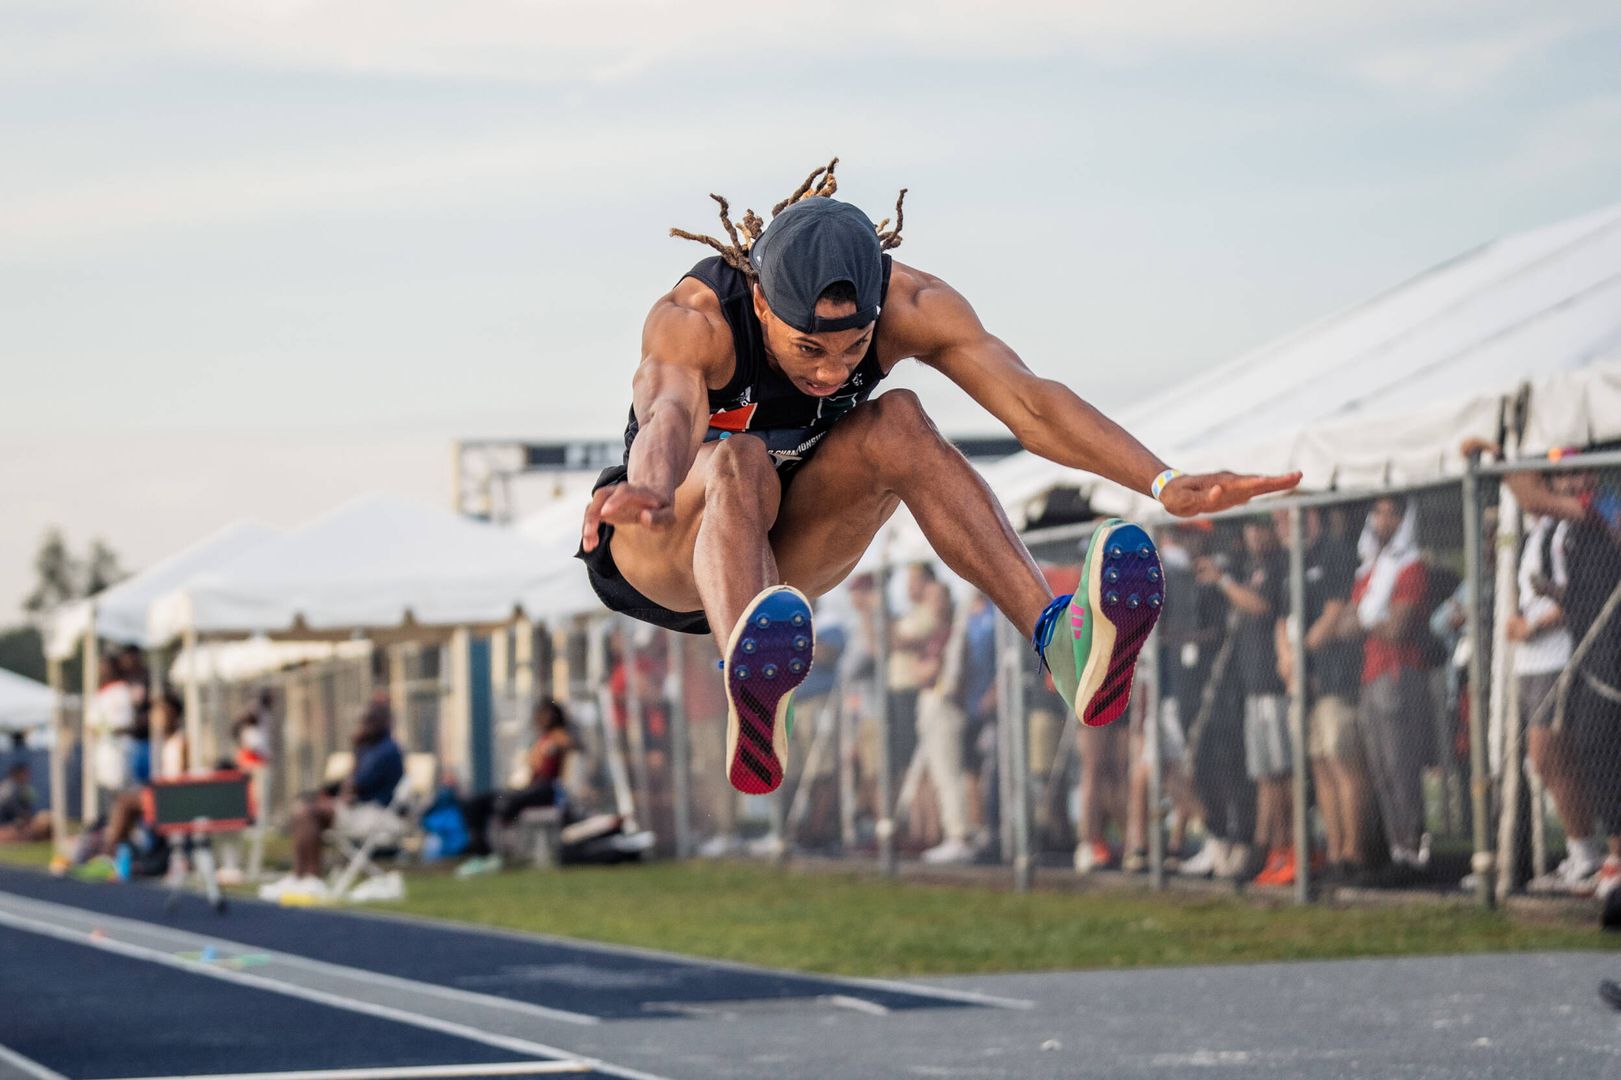 Robinson and Andrade Nationals Bound, Rhea Advances on Day One of NCAA Prelims